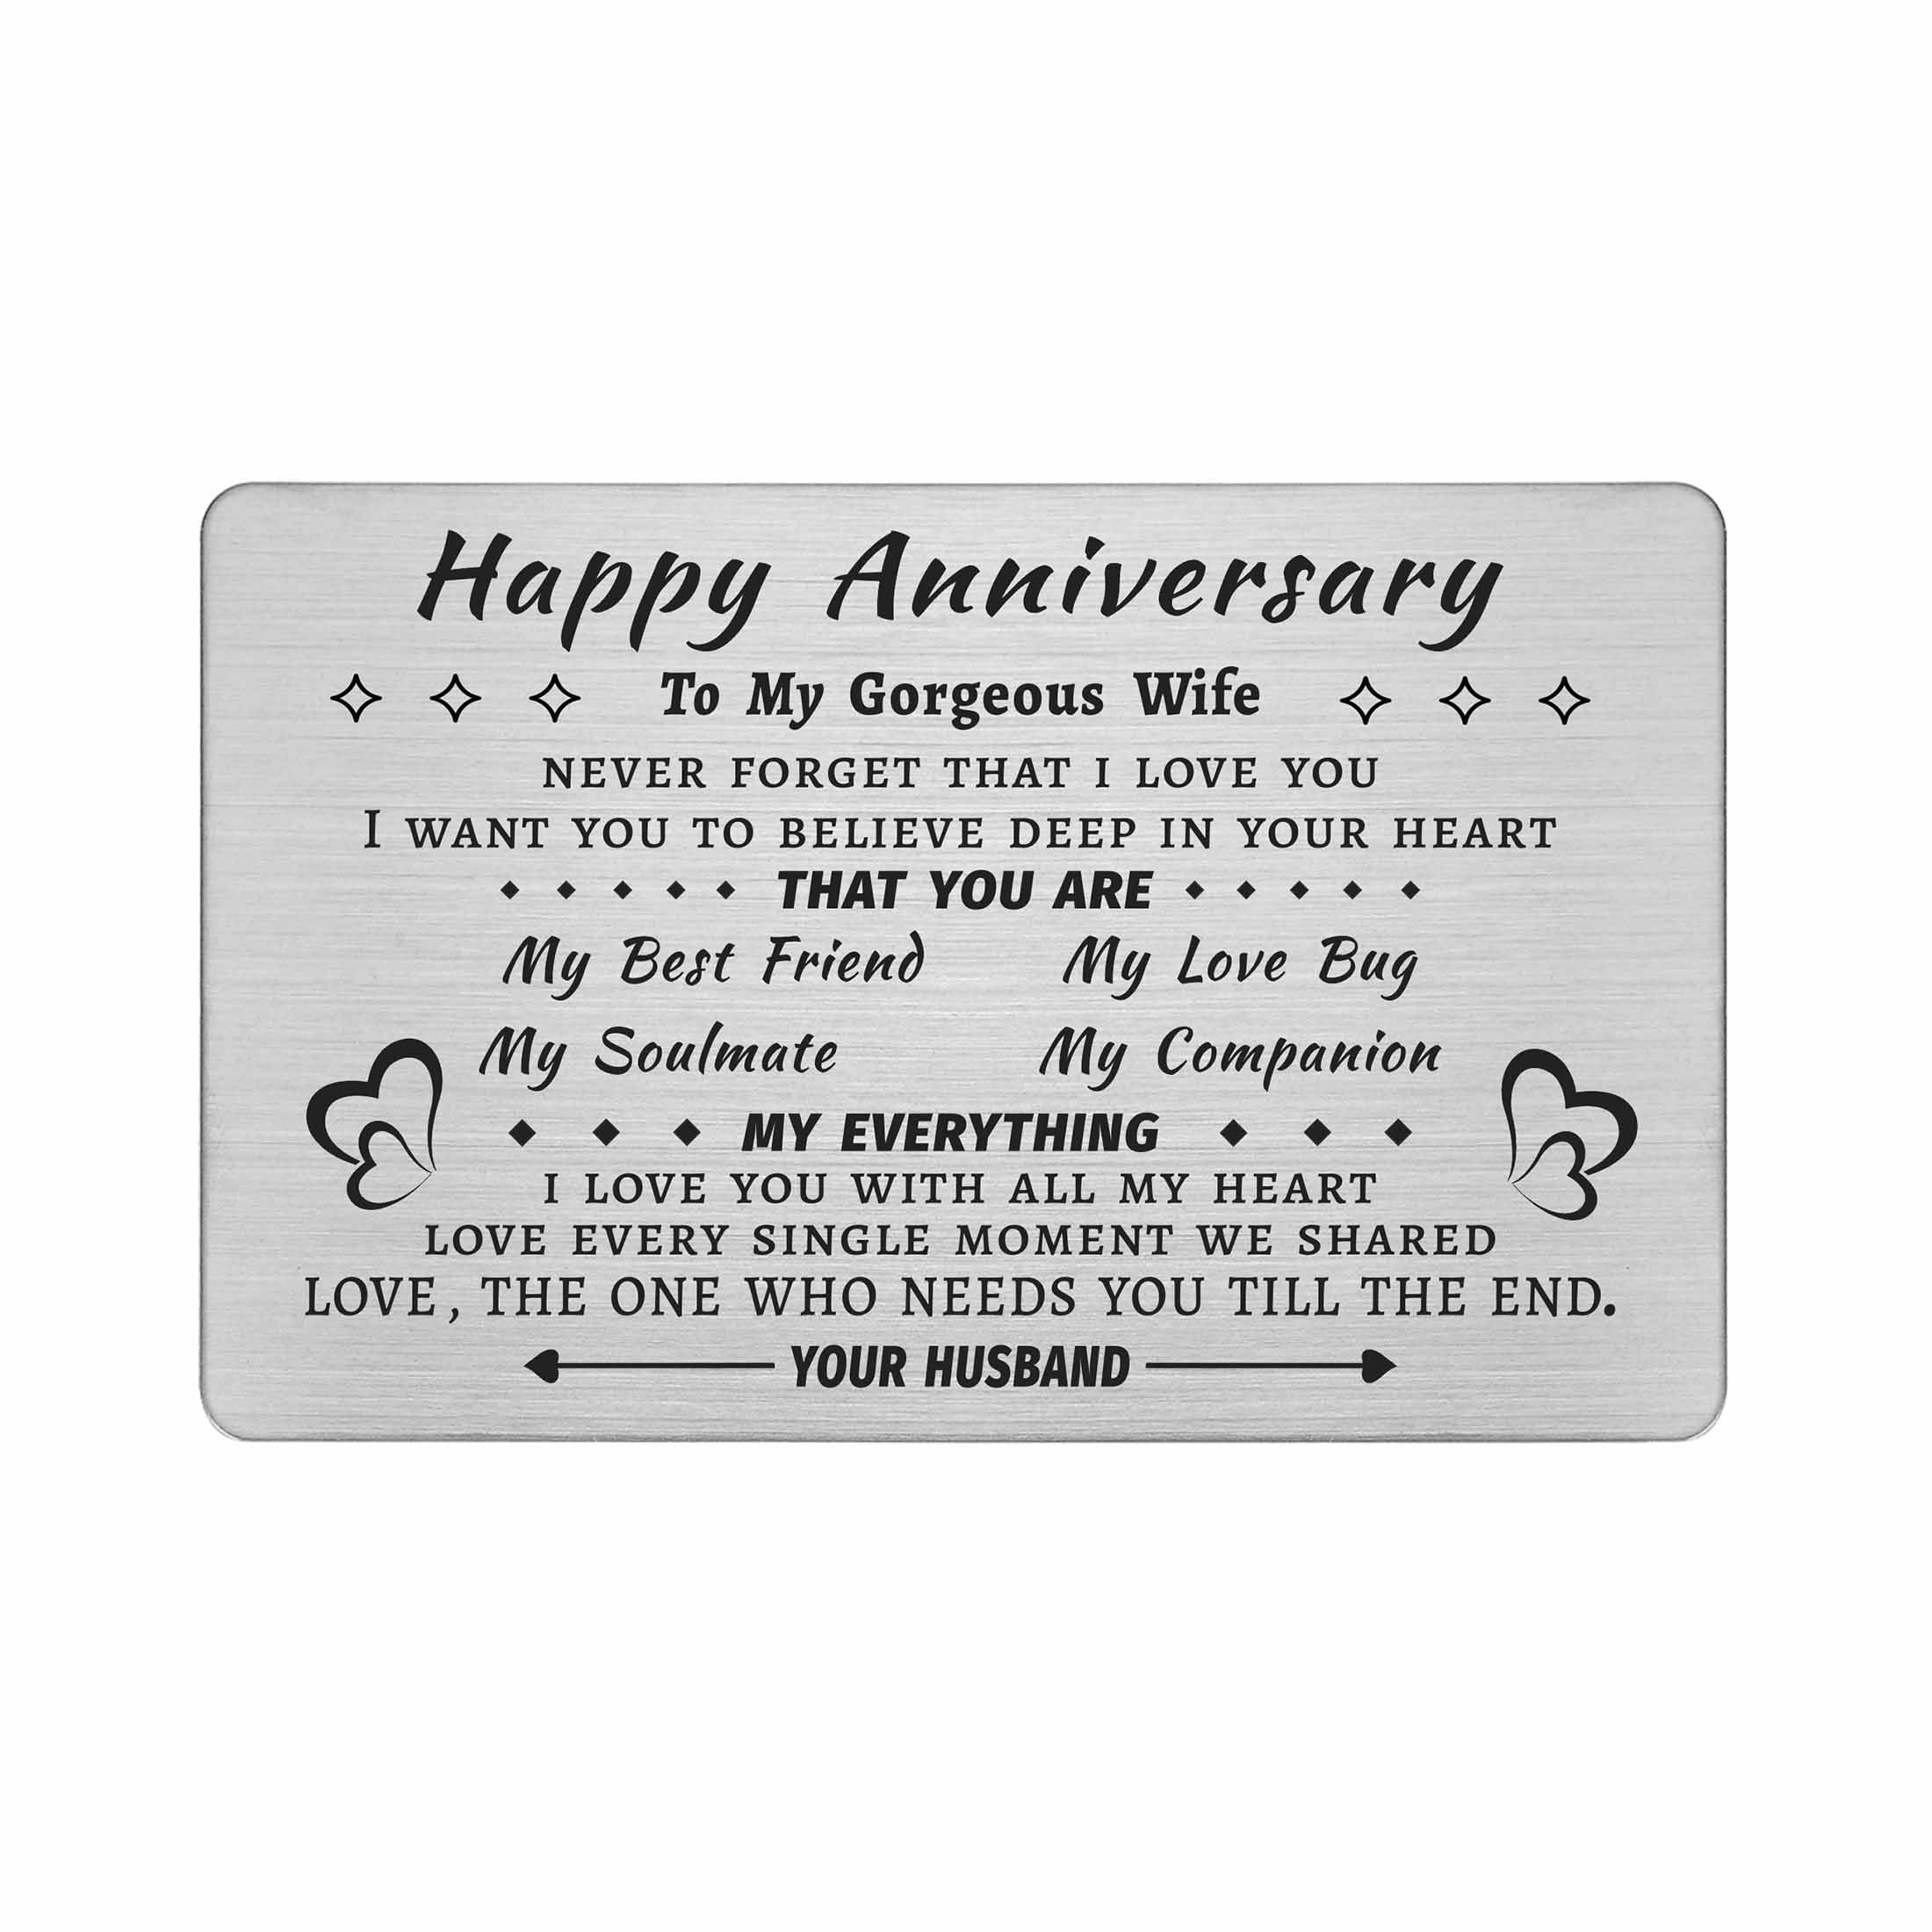 Yobent Boyfriend Gifts Card for Christmas Valentines Birthday, I Love You Cards for Him, Fiance Engraved Wallet Card, Size: 3.35 x 2.13, Silver